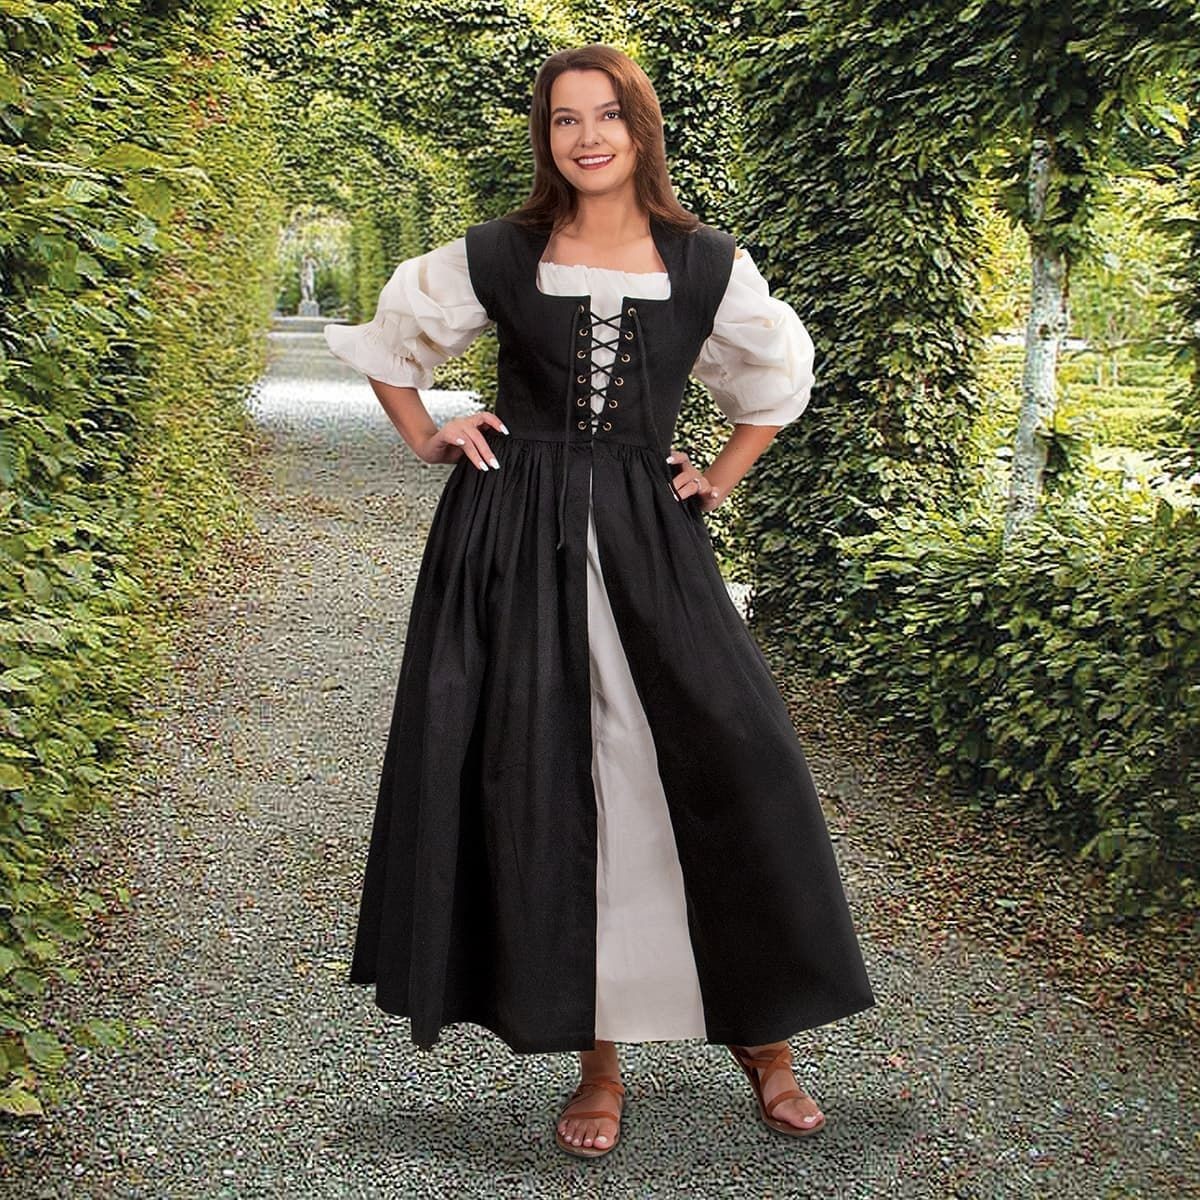 Black Renaissance Overdress - Country Maid Skirt with Integral Bodice